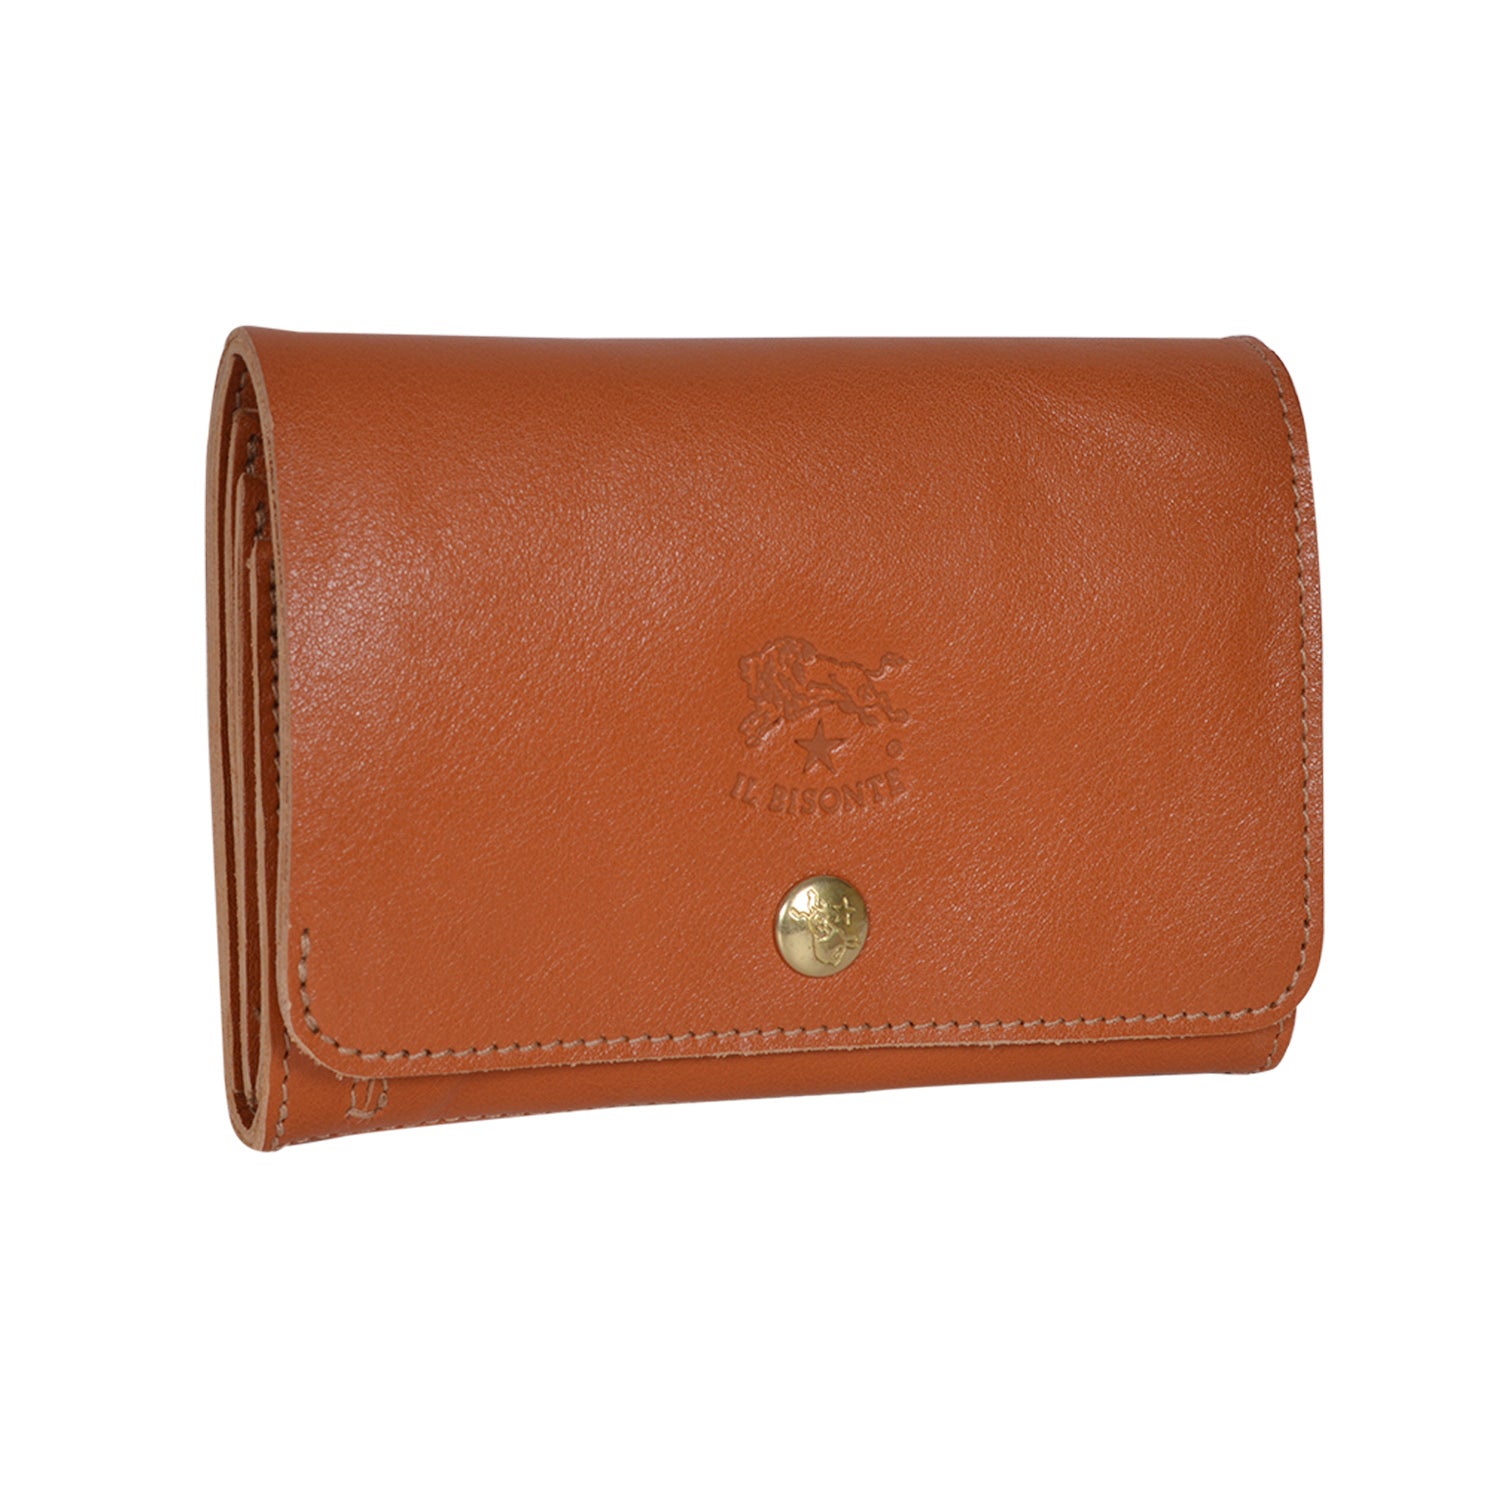 IL BISONTE UNISEX COMPACT FOLDING WALLET IN CARAMEL  COWHIDE LEATHER